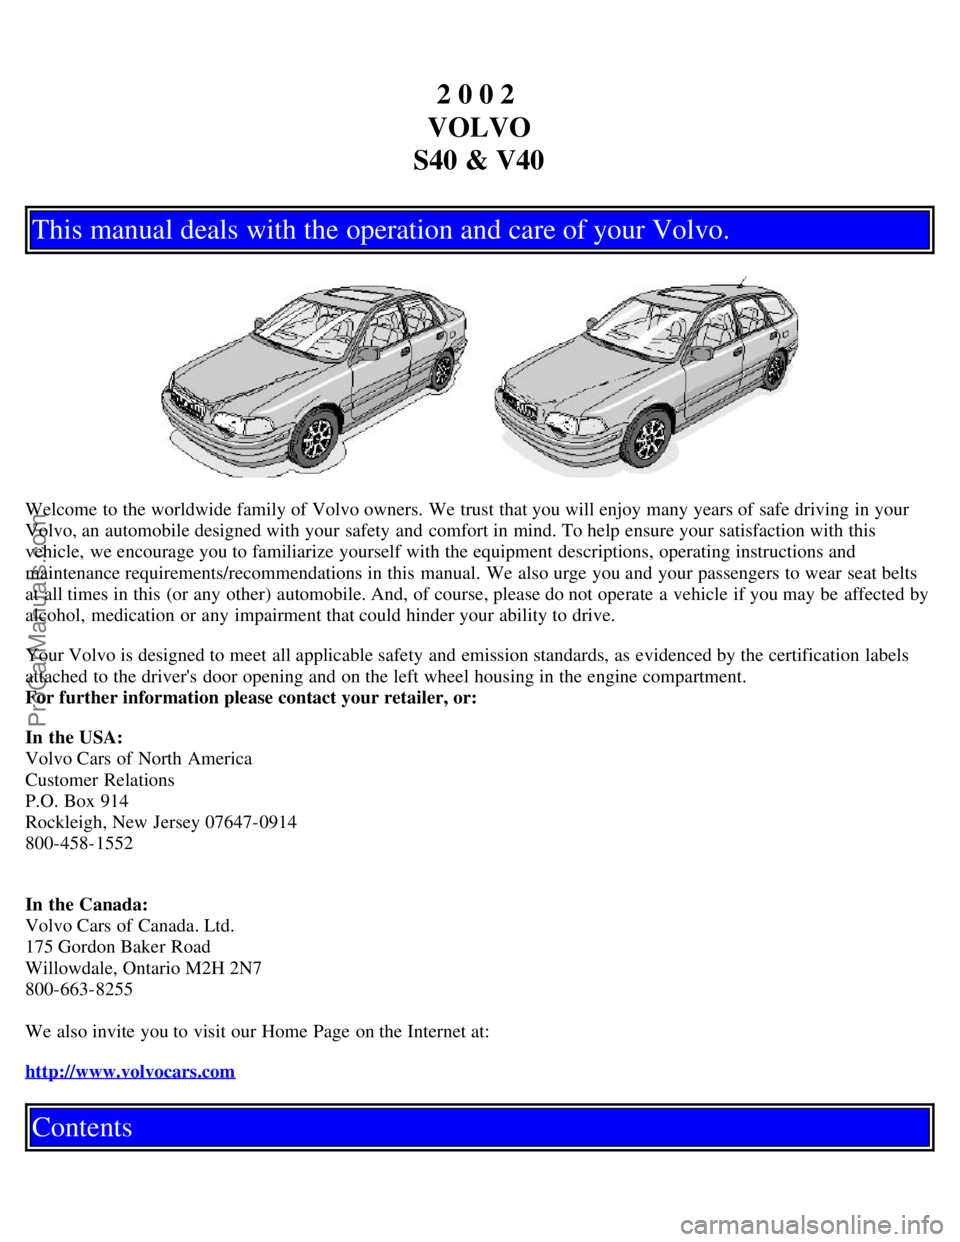 VOLVO V4 2002  Owners Manual 2 0 0 2 
VOLVO
S40 & V40
This manual deals with the operation and care of your Volvo.
Welcome to the worldwide family of Volvo owners. We trust that you will enjoy many years of safe driving in your
V